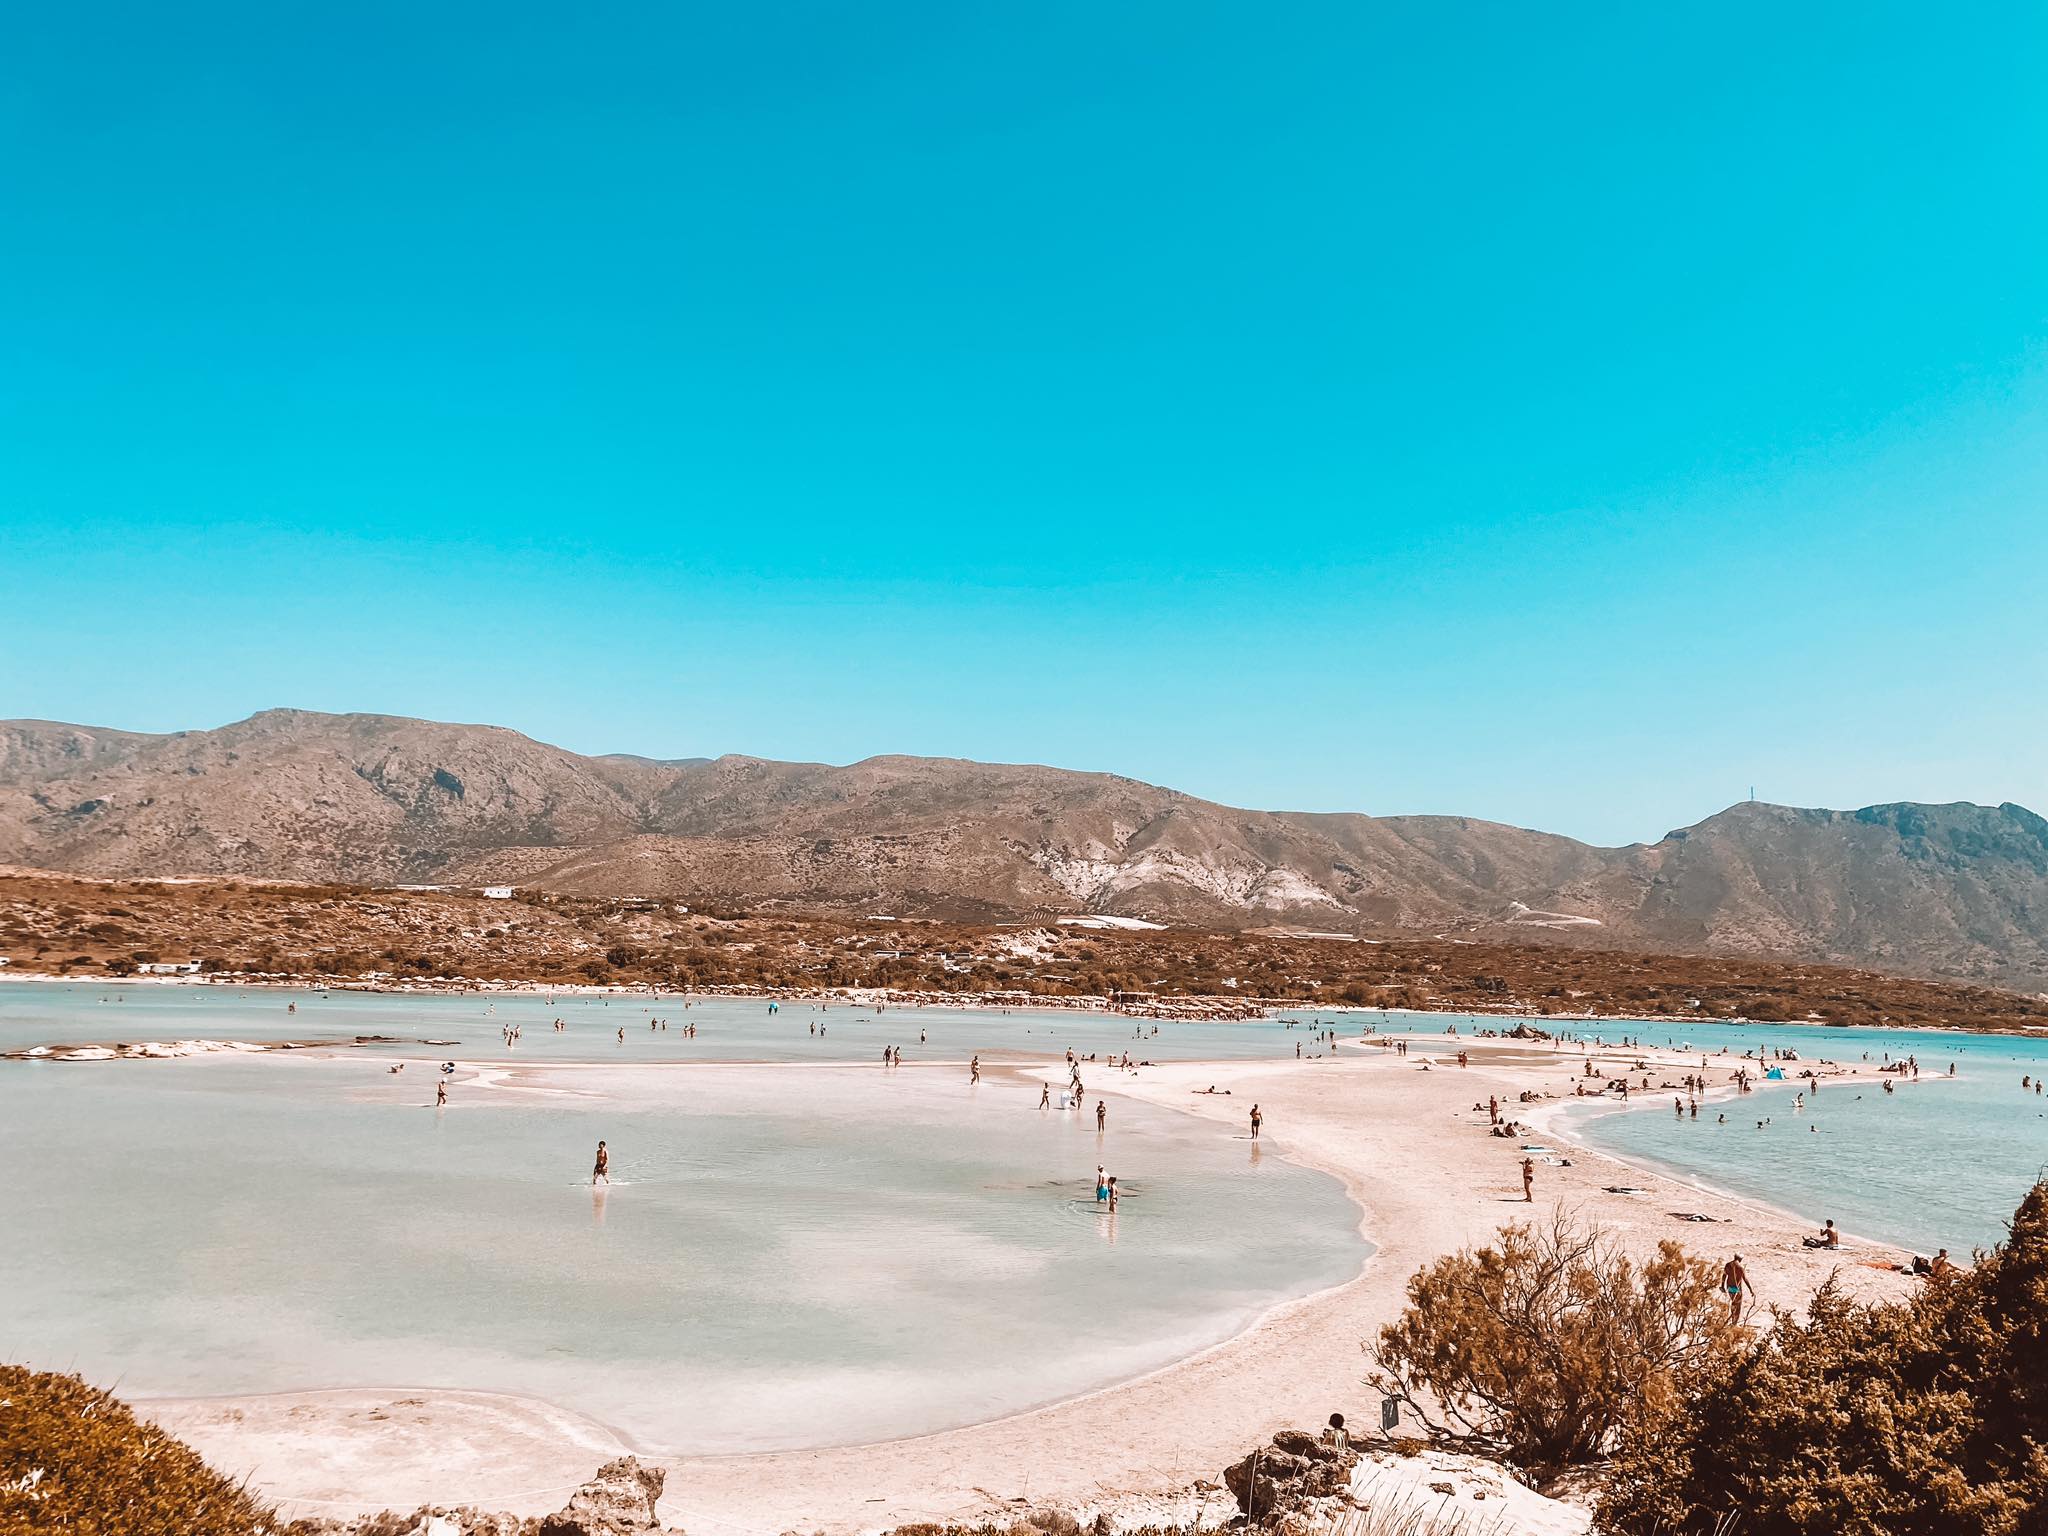 Day trip to Elafonisi beach from Chania: Is it worth it? - Em Knows Places